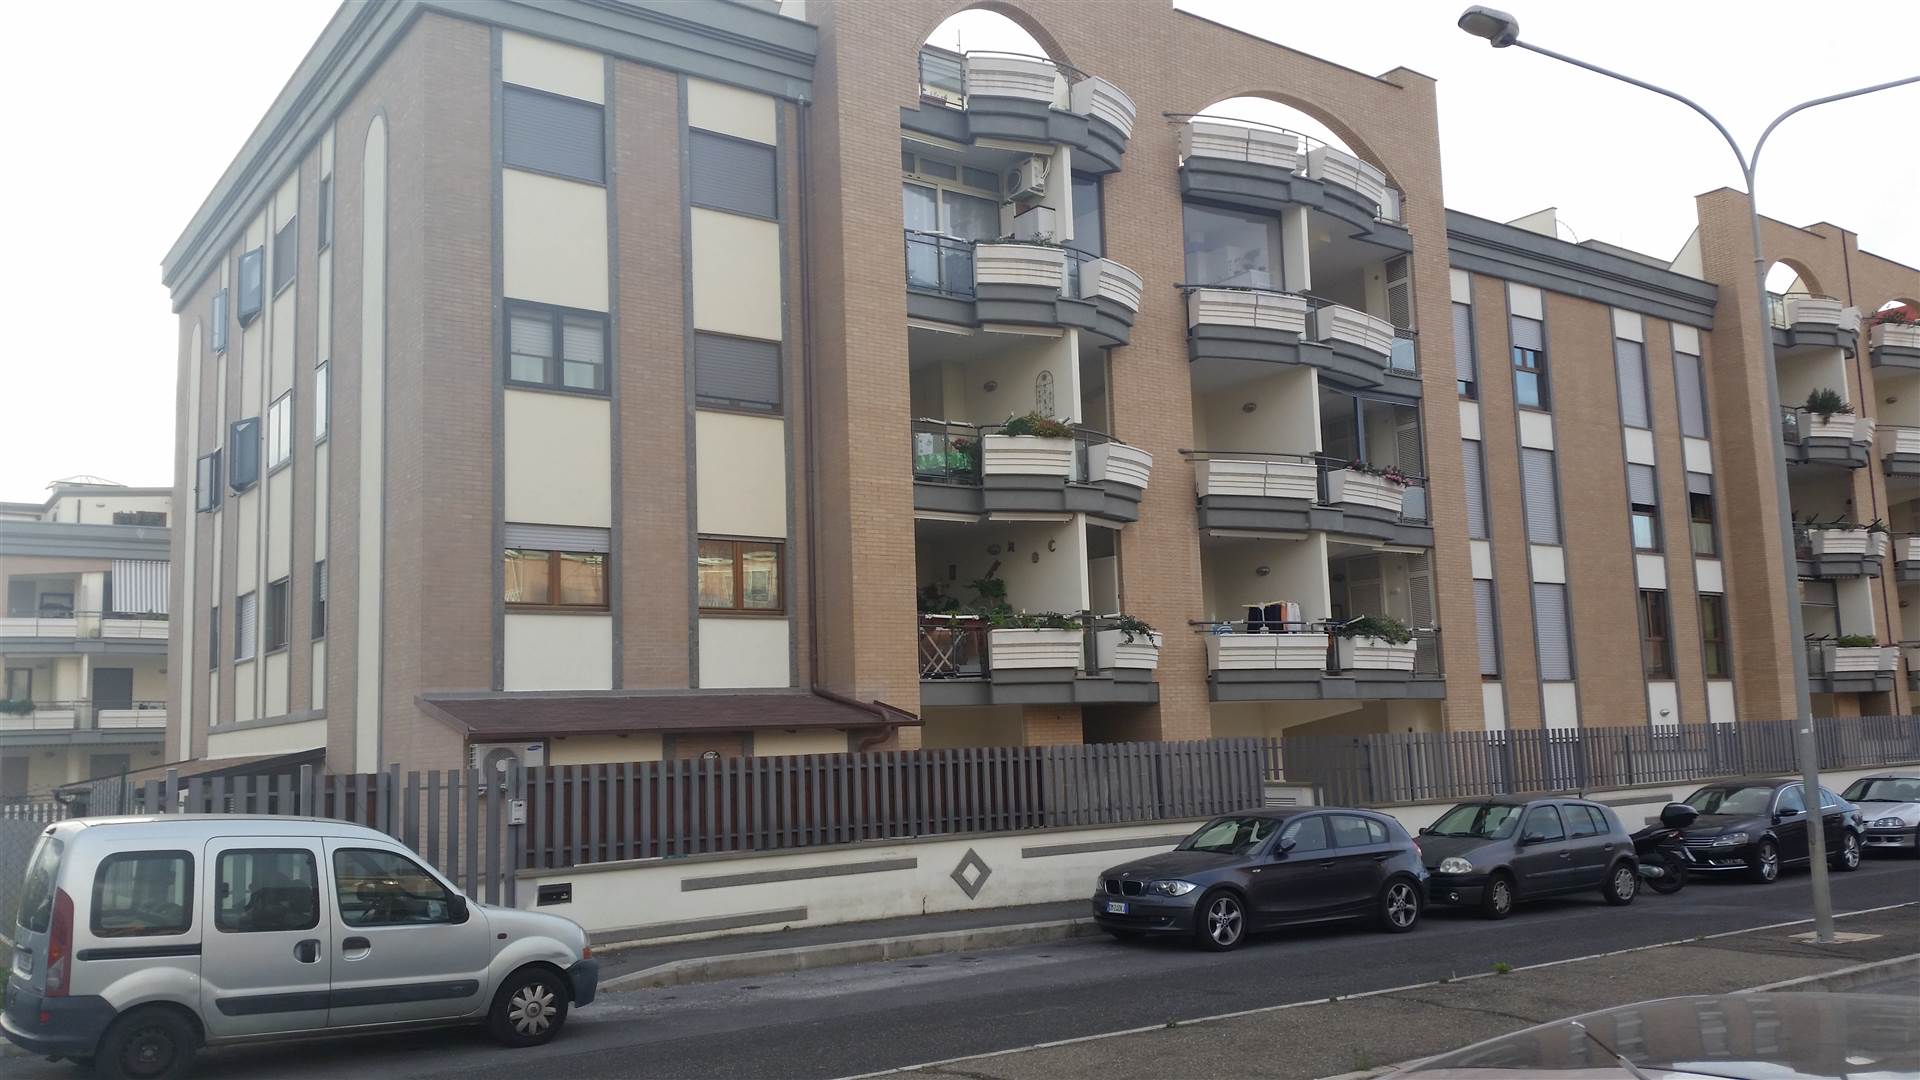 SAN LIBORIO, CIVITAVECCHIA, Penthouse for sale of 115 Sq. mt., Energetic class: C, Epi: 47,522 kwh/m2 year, composed by: 4 Rooms, Separate kitchen, , 